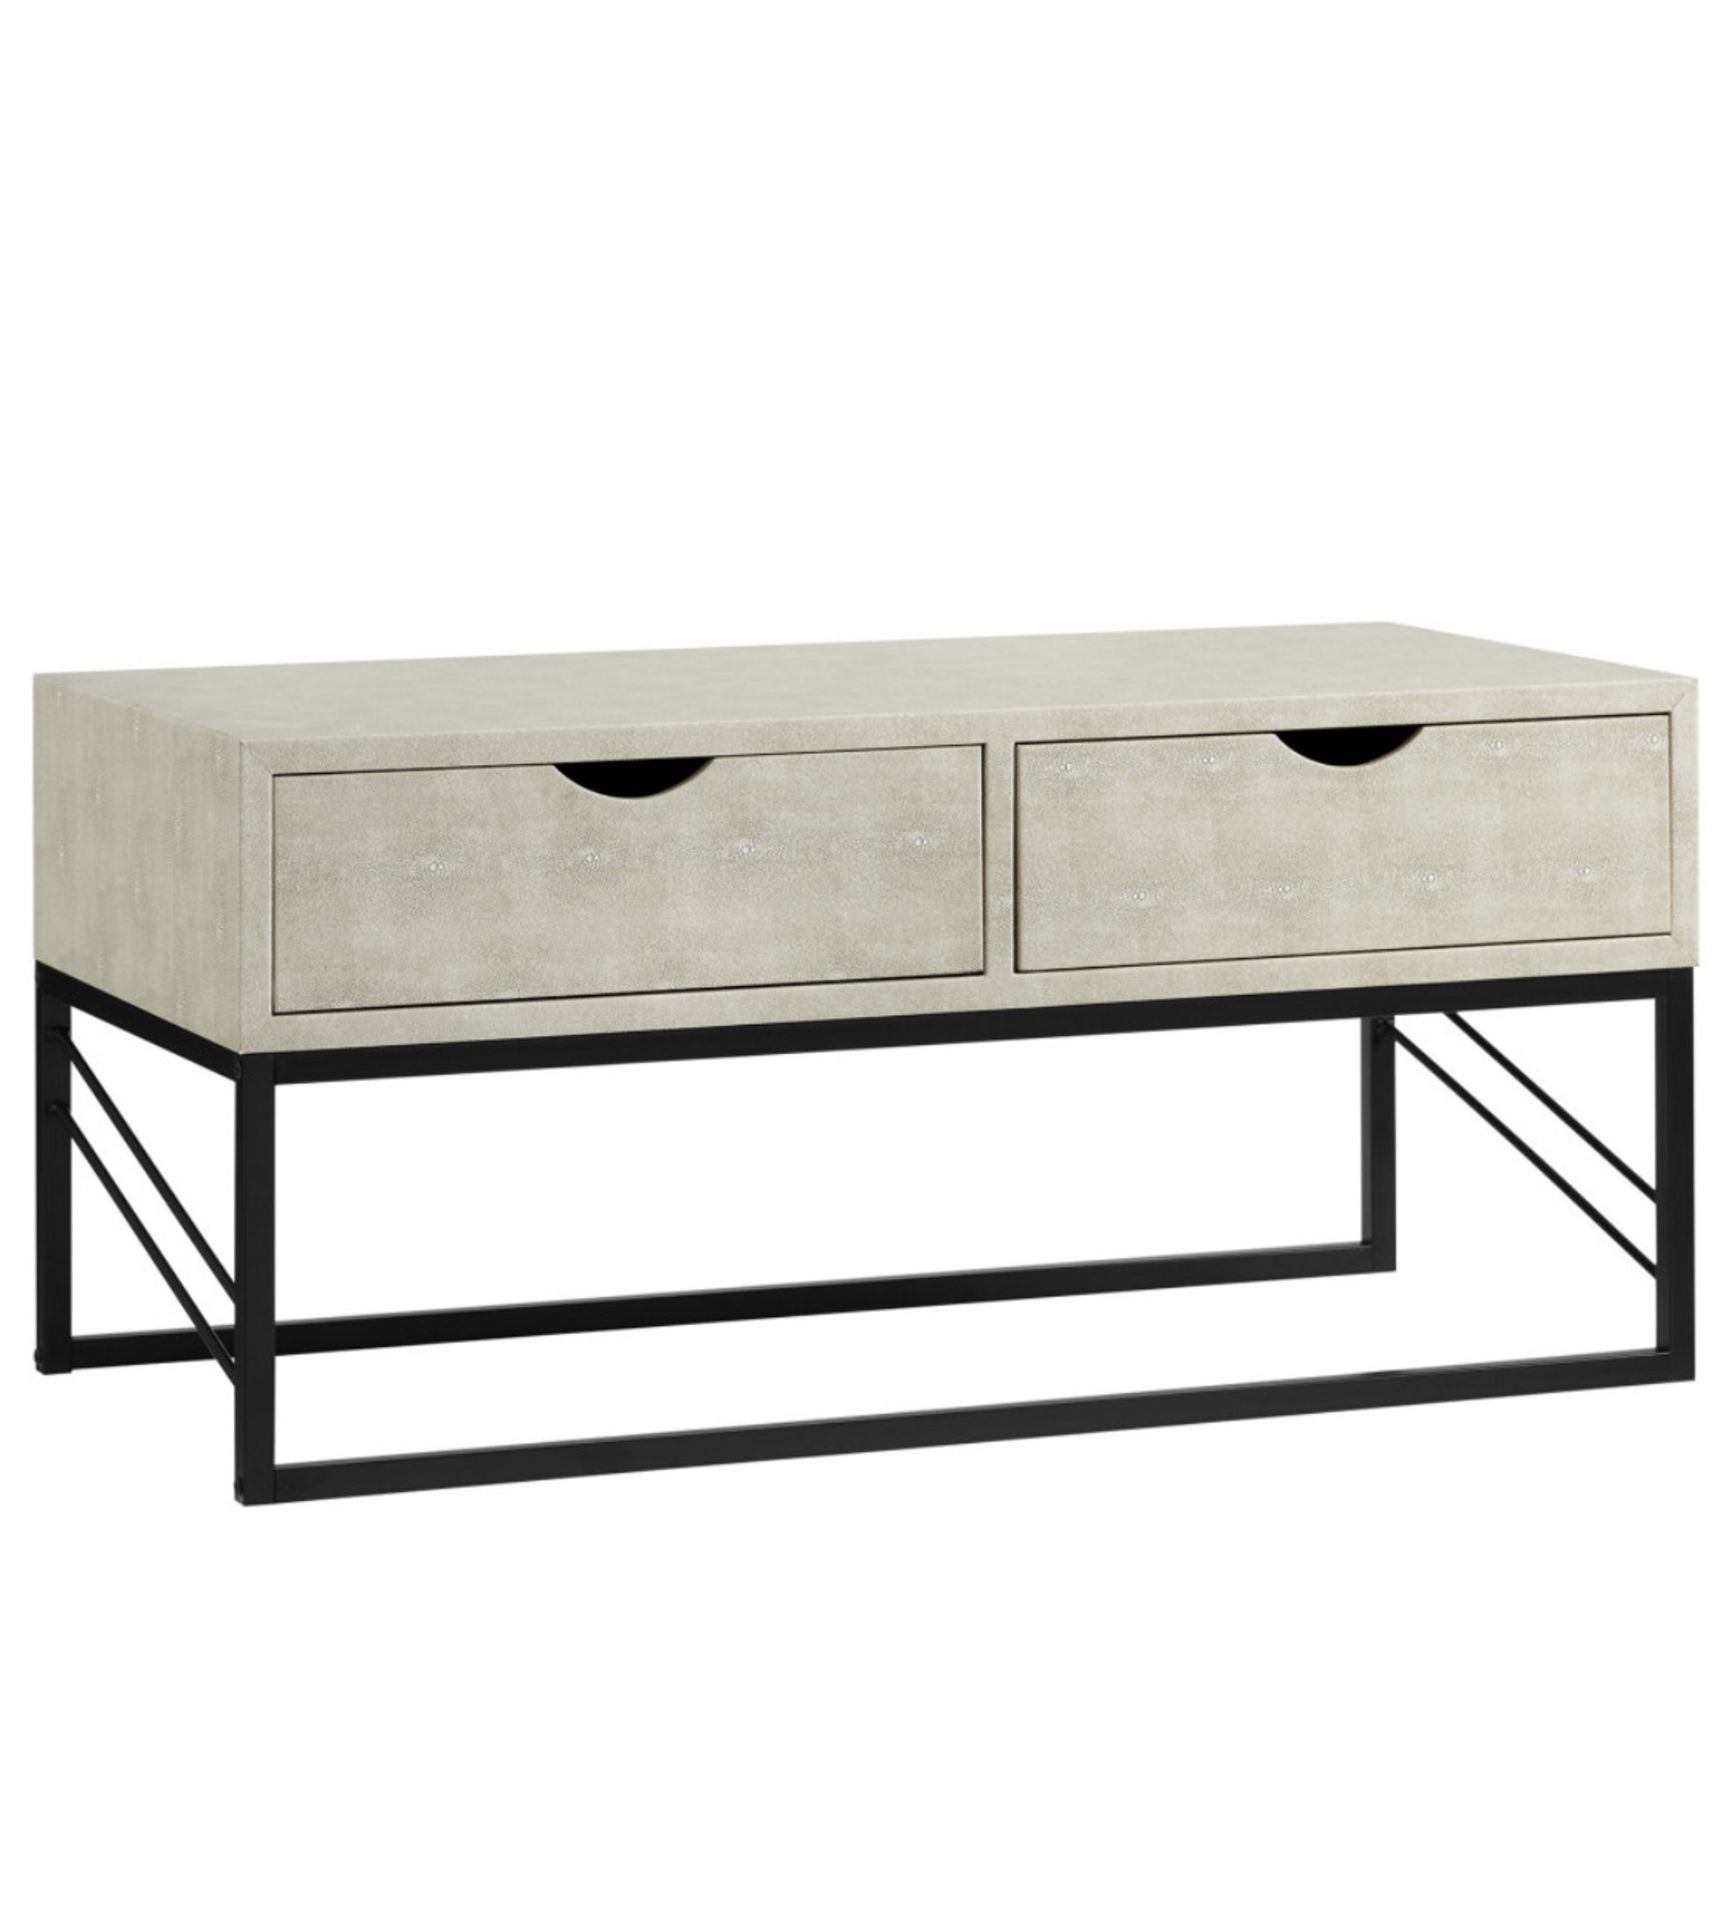 EYNESFORD 2 DRAWER FAUX SHAGREEN COFFEE TABLE IN OFF WHITE - RRP £349 - Image 3 of 5